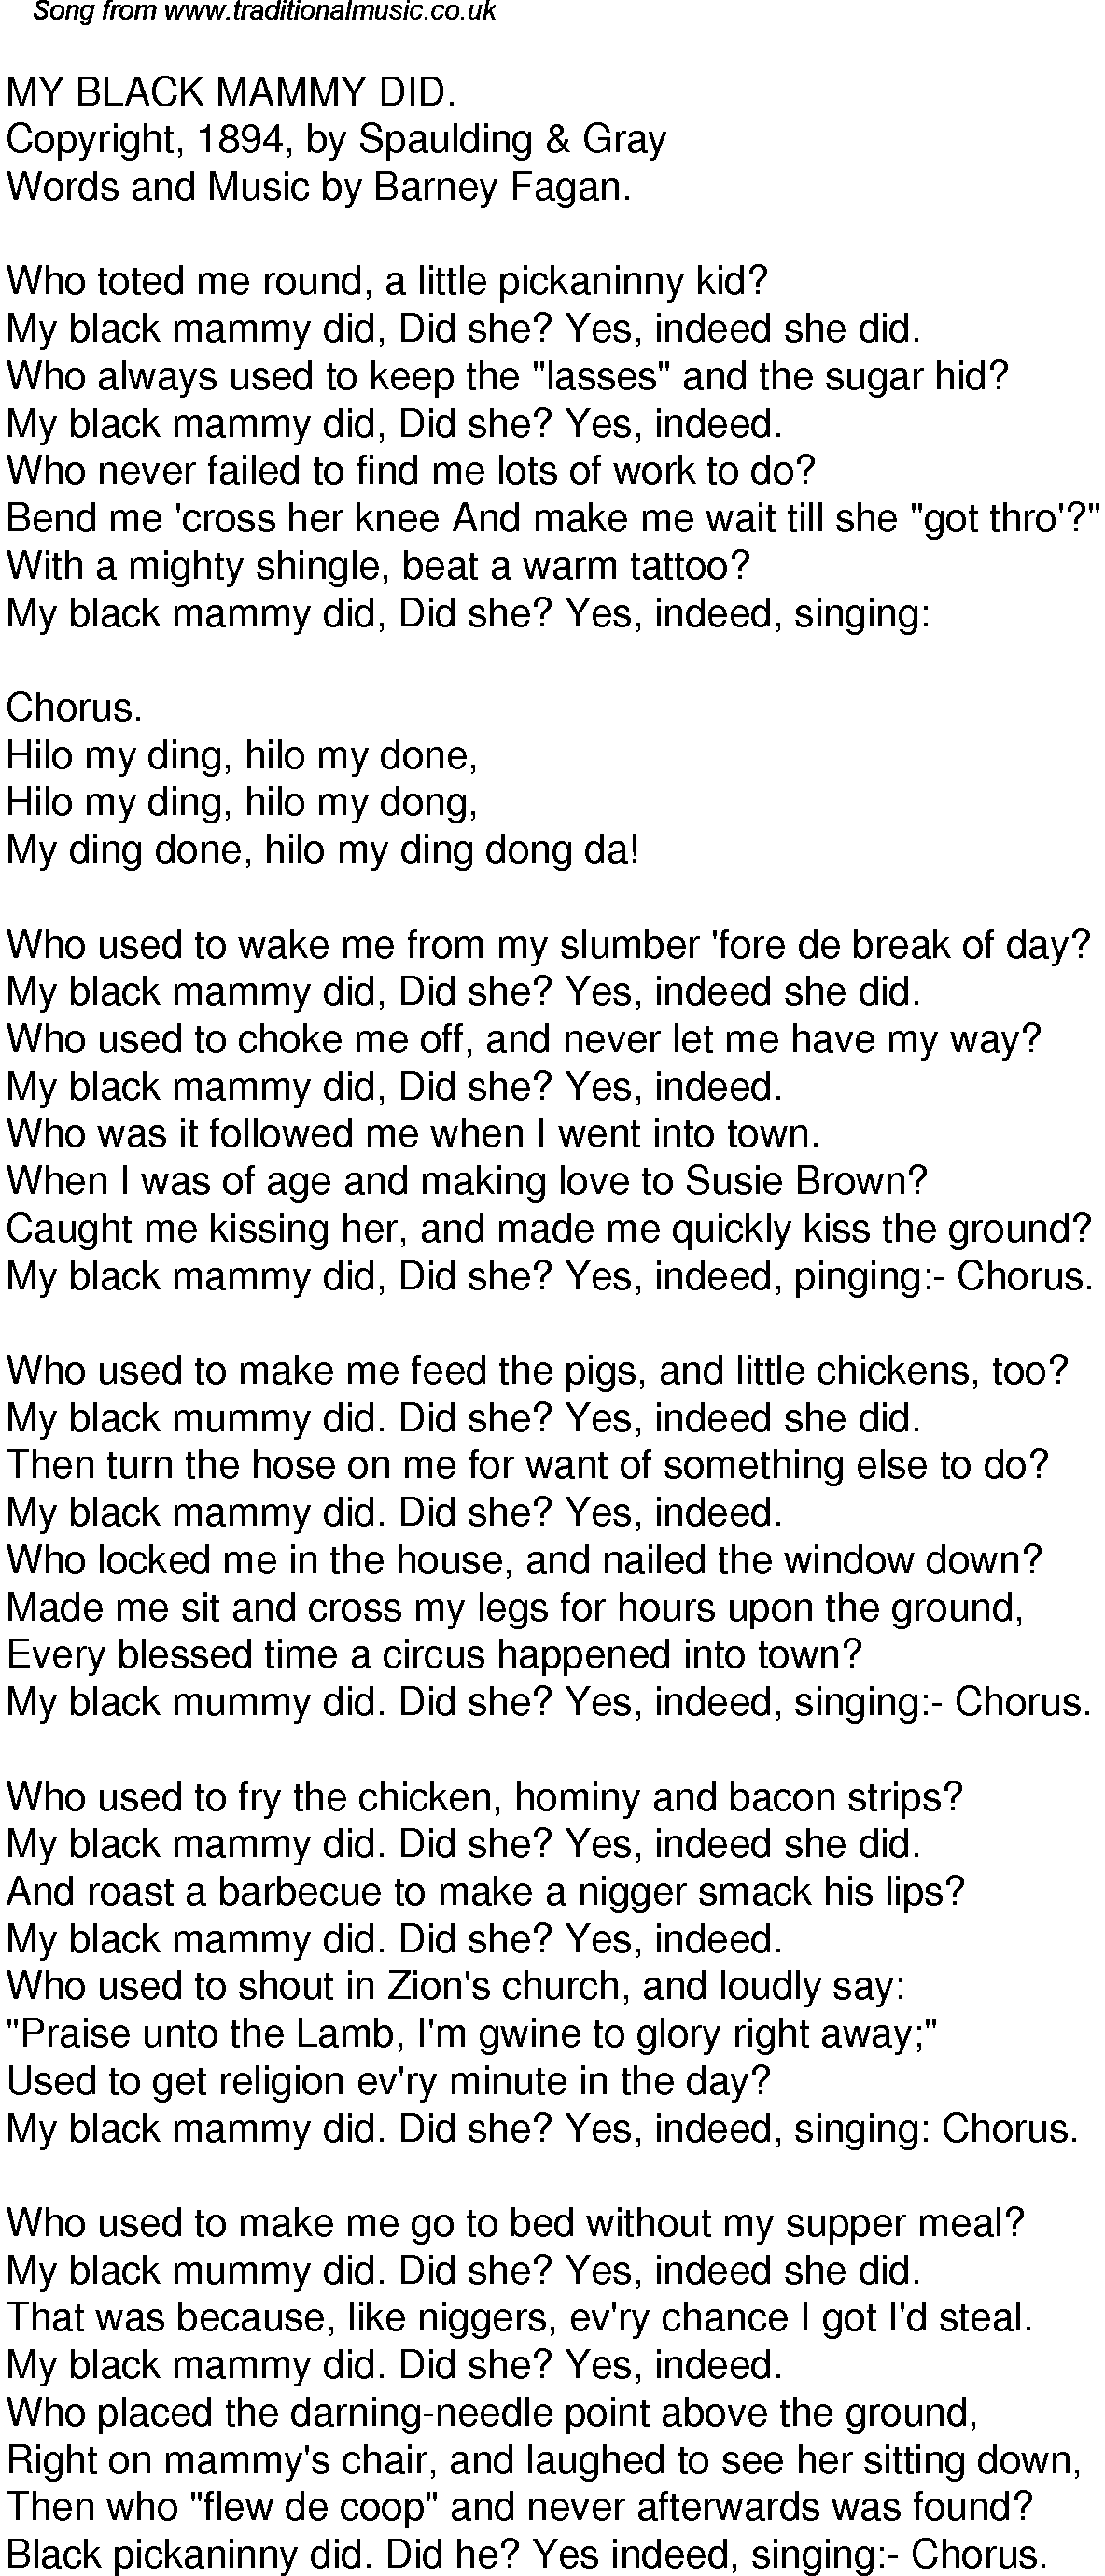 Old Time Song Lyrics For 45 My Black Mammy Did